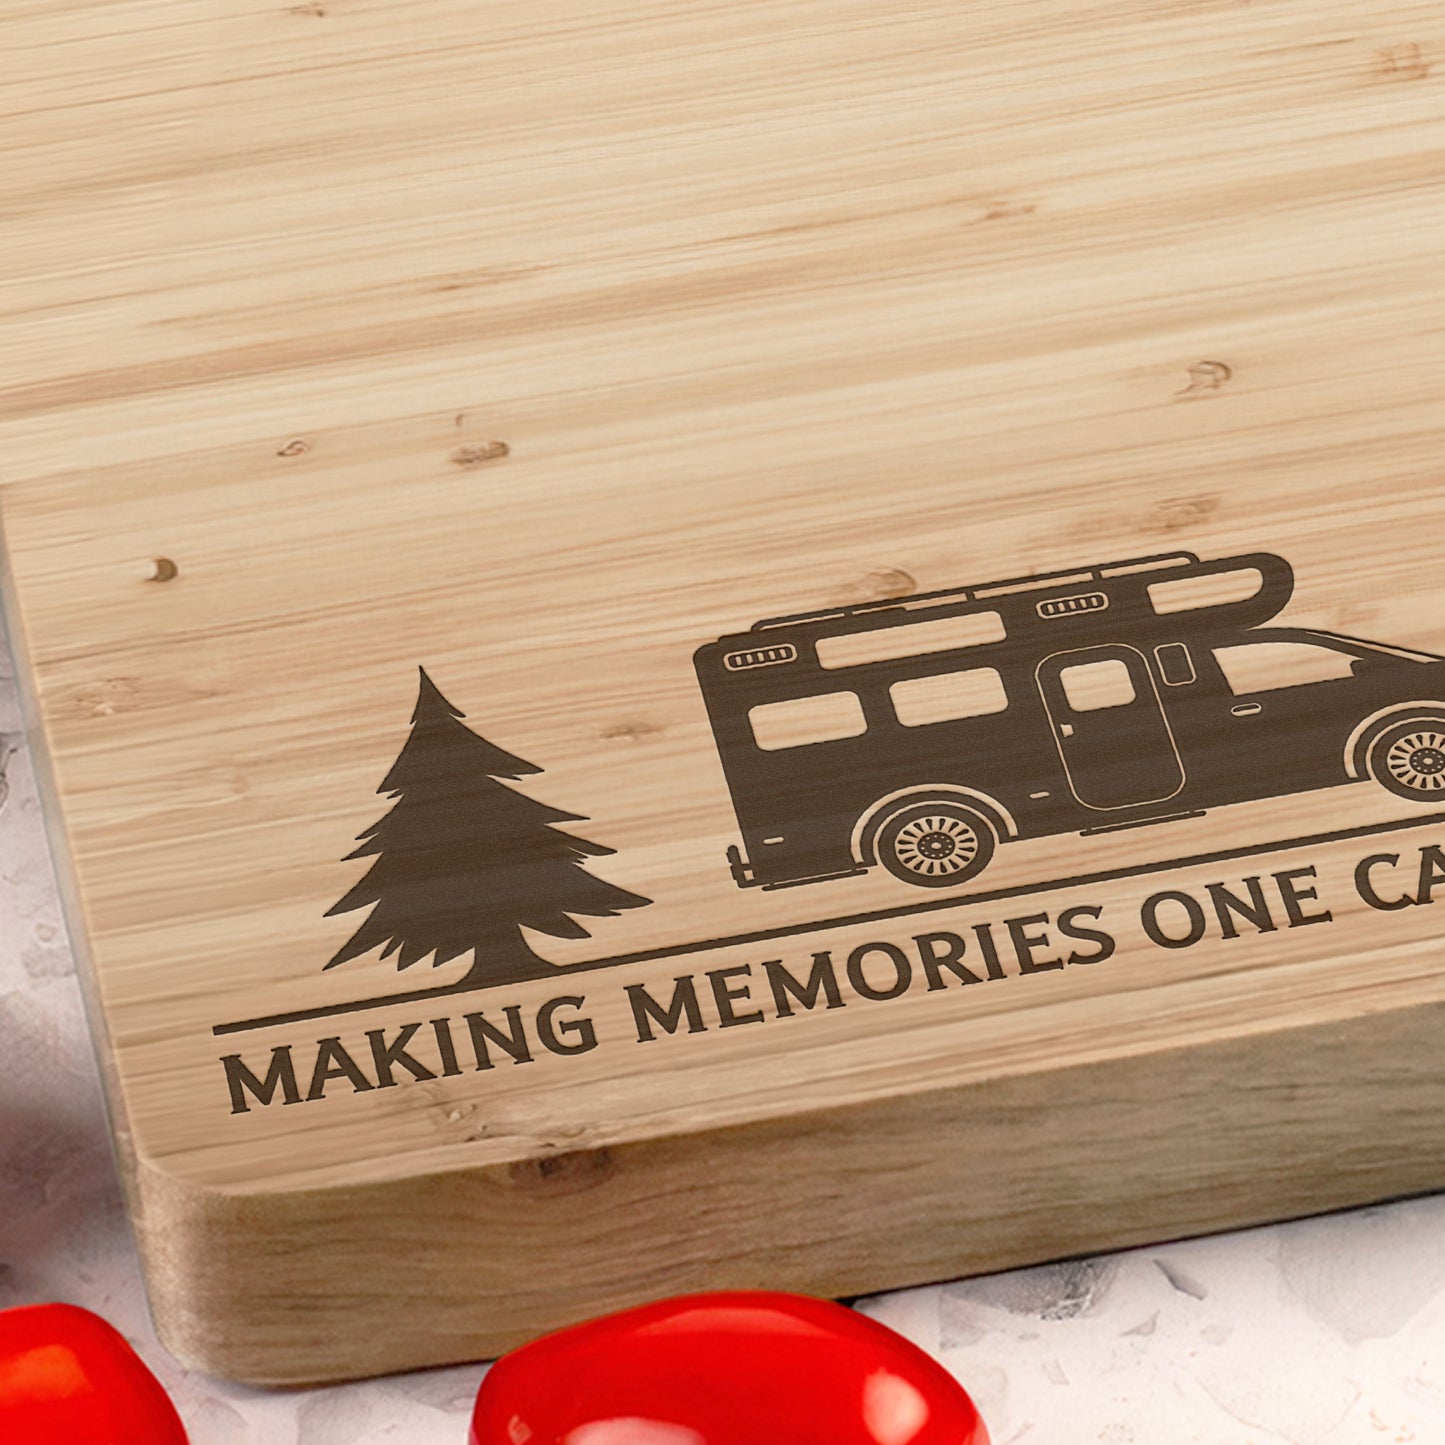 Making Memories - Personalized Cutting Board